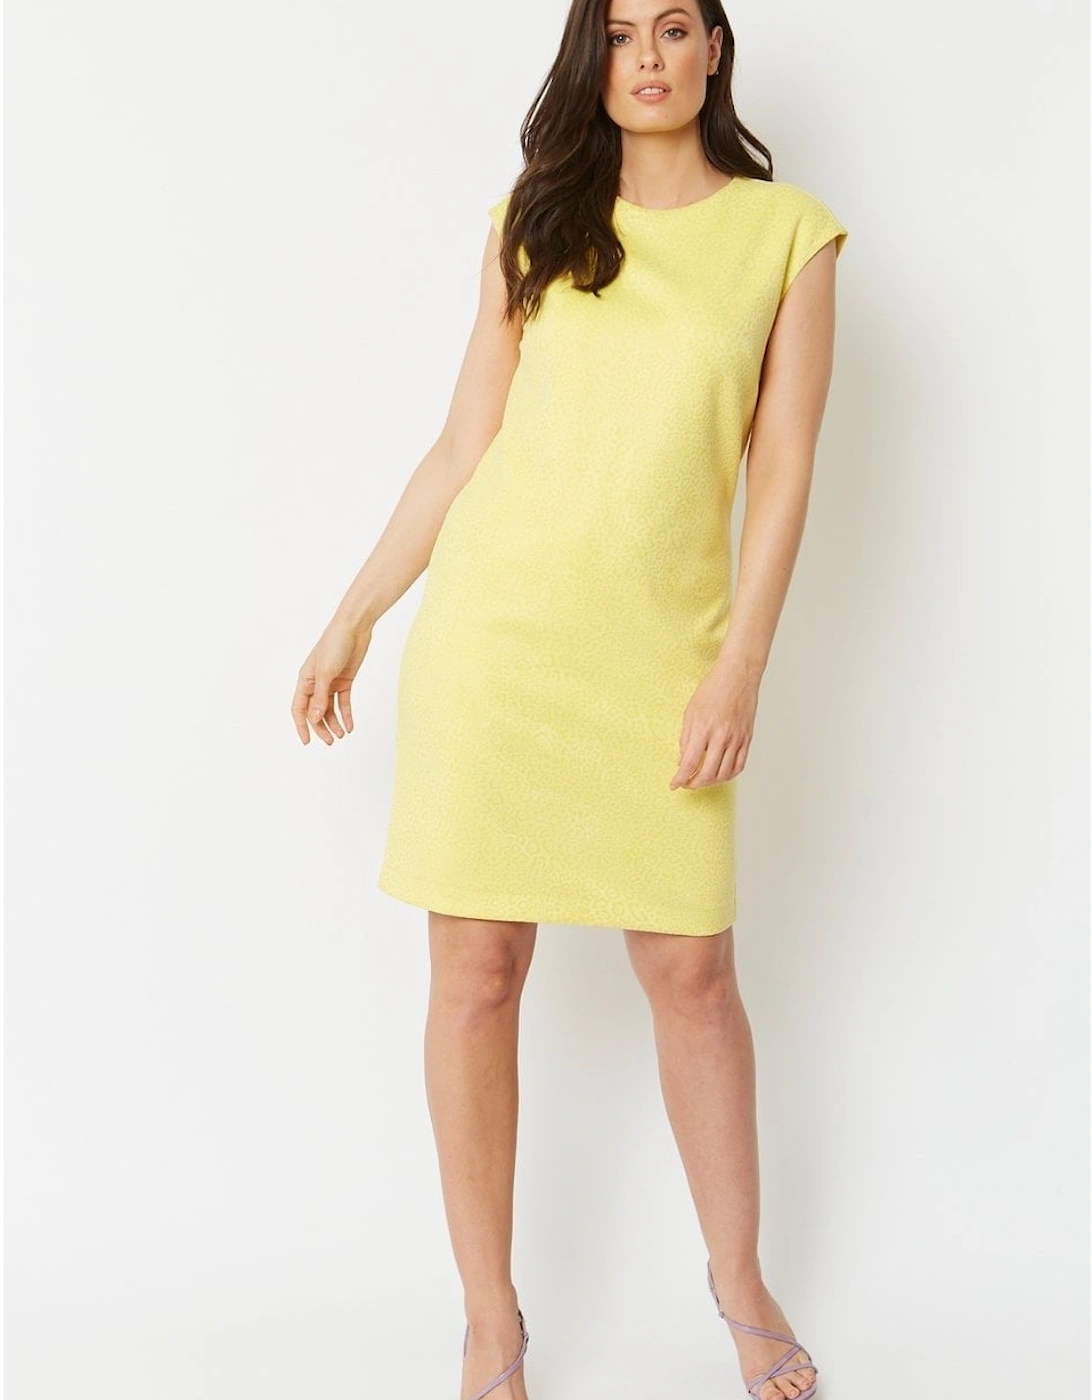 Yellow Faux Suede Animal Print Dress